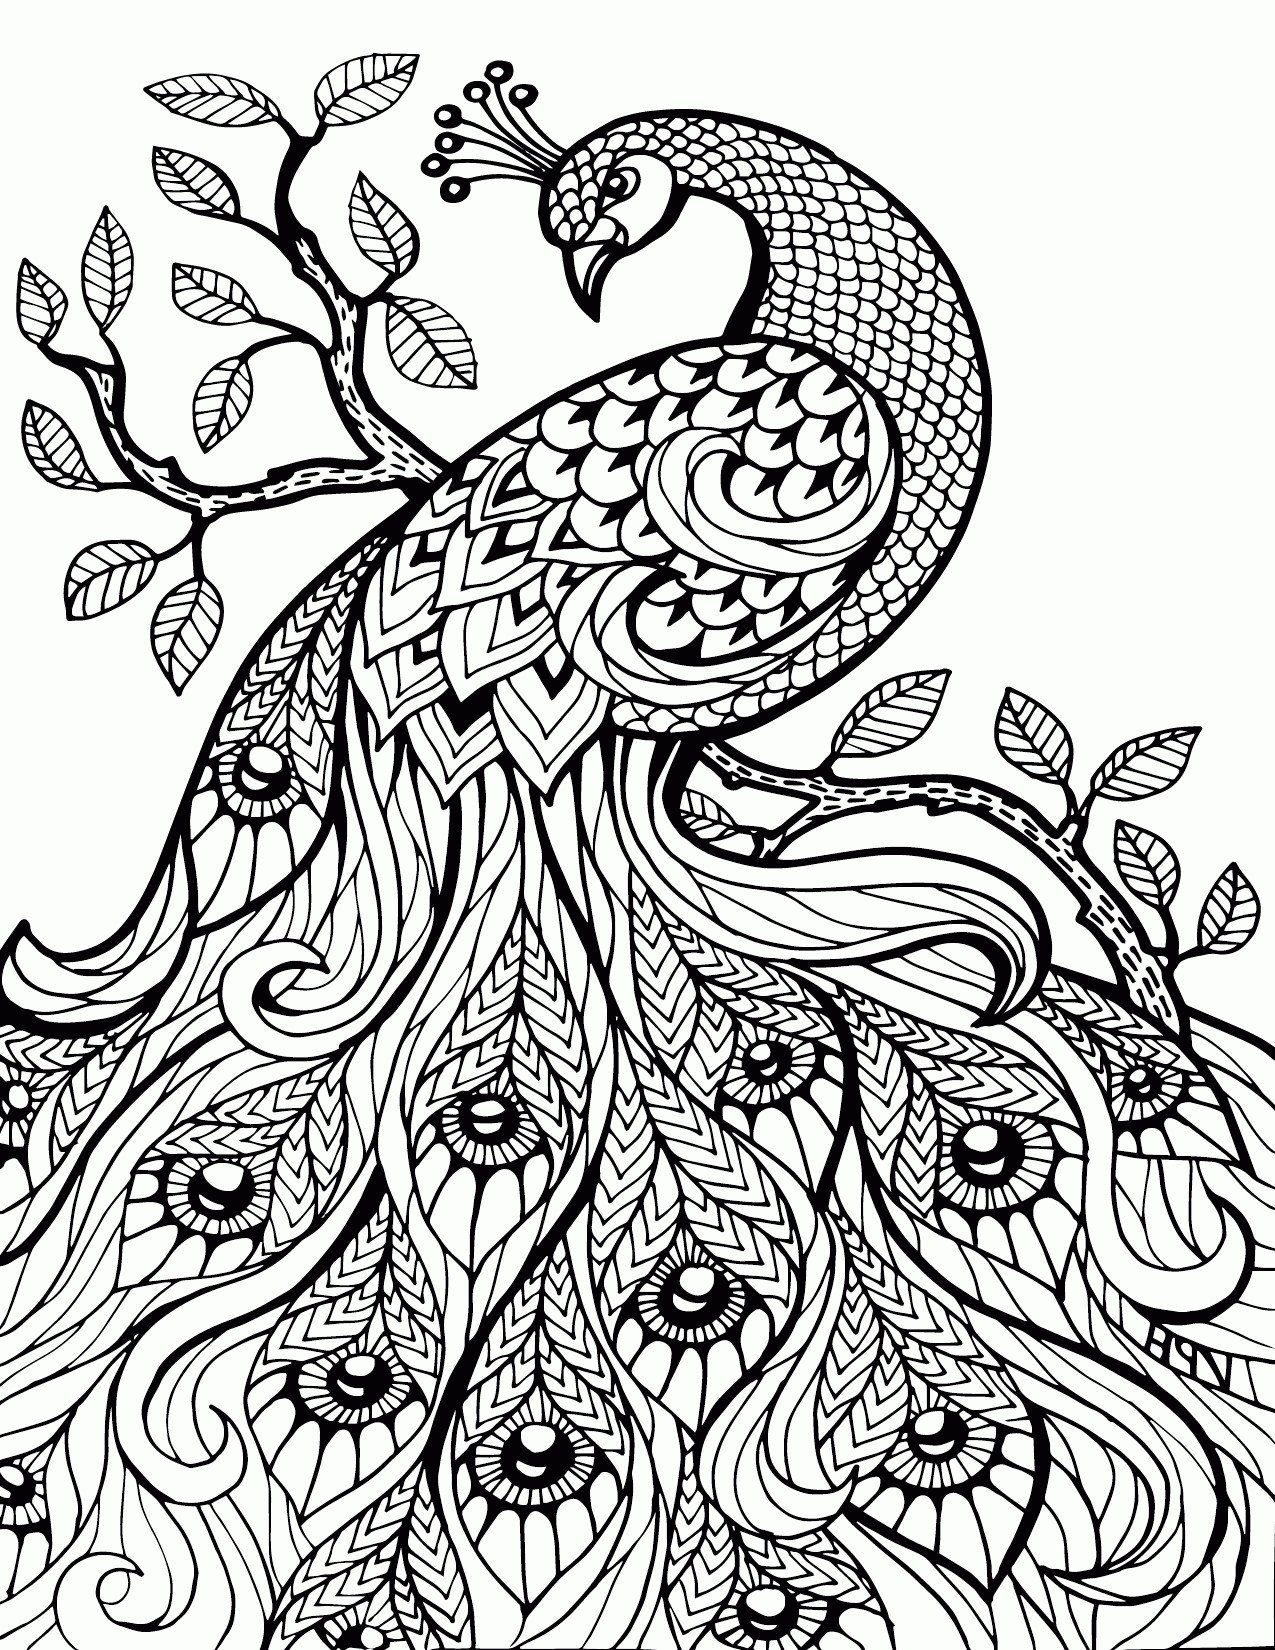 20 Stress Relief Coloring For Adults Ringinputeh.best Coloring Home